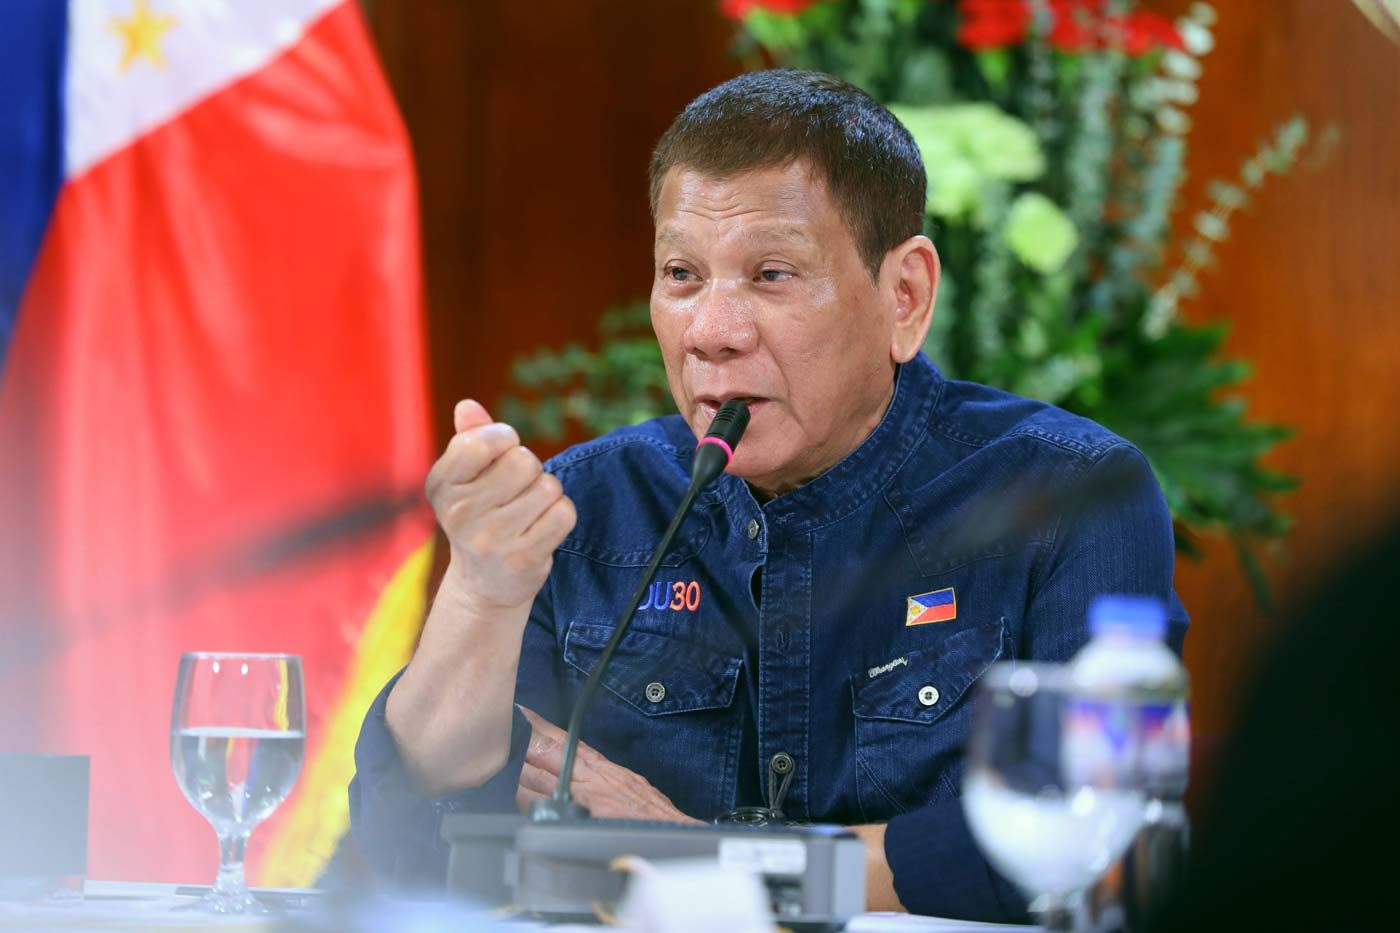 Filipino chemists fact-check Duterte: Gasoline is not a disinfectant